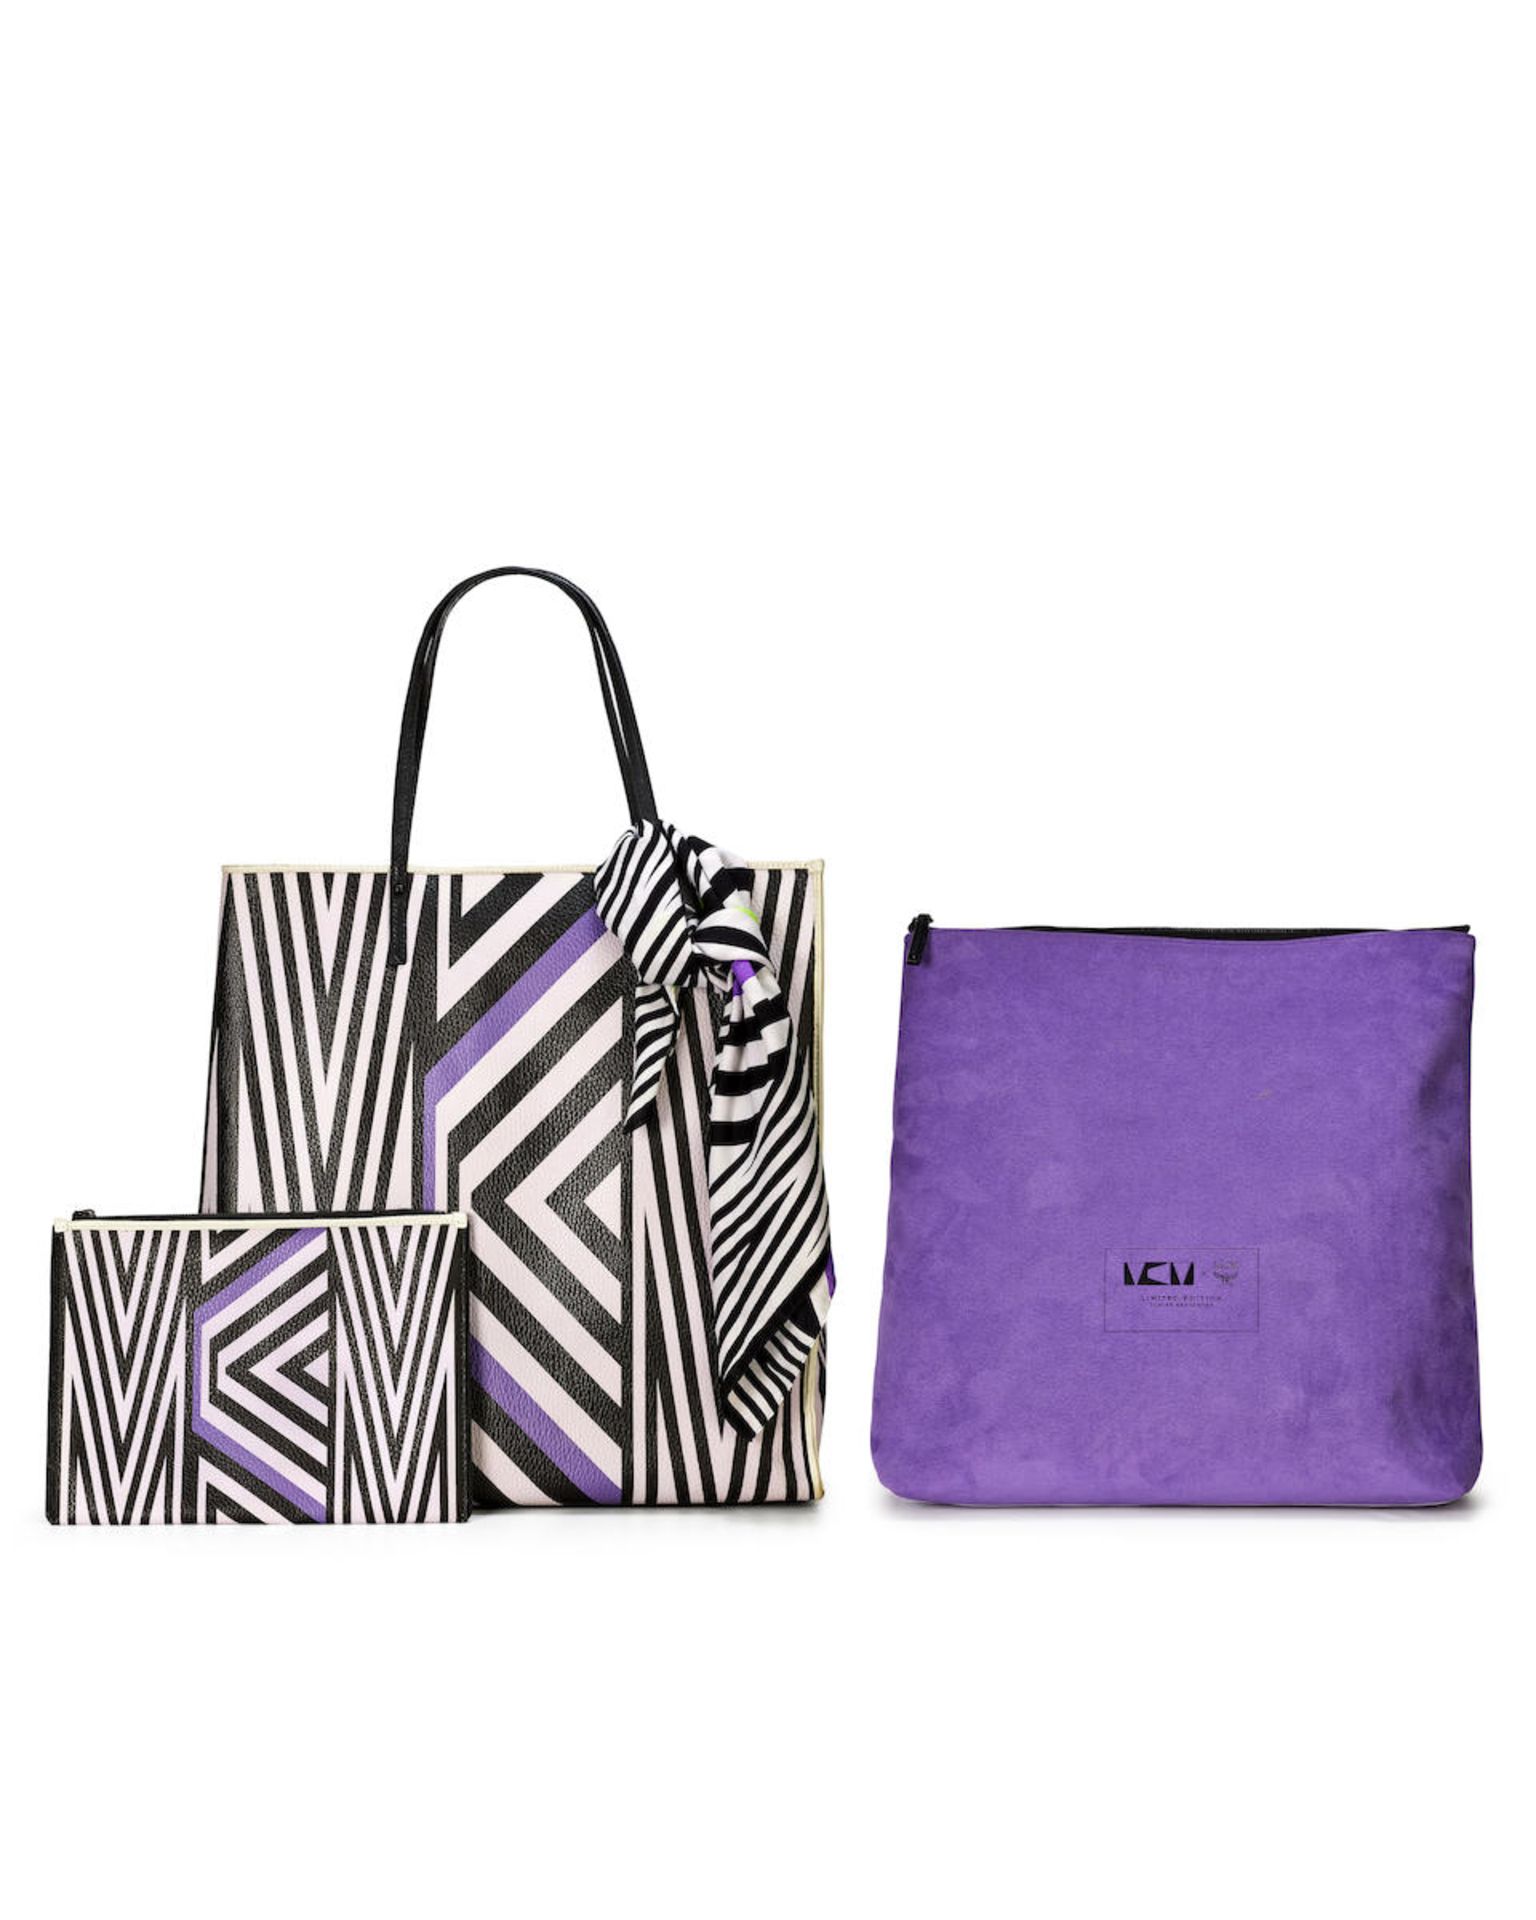 [NO RESERVE] MCM: MCM x TOBIAS REHBERGER LIMITED EDITION PRINTED TOTE BAG SET 150/250 (Includes ...